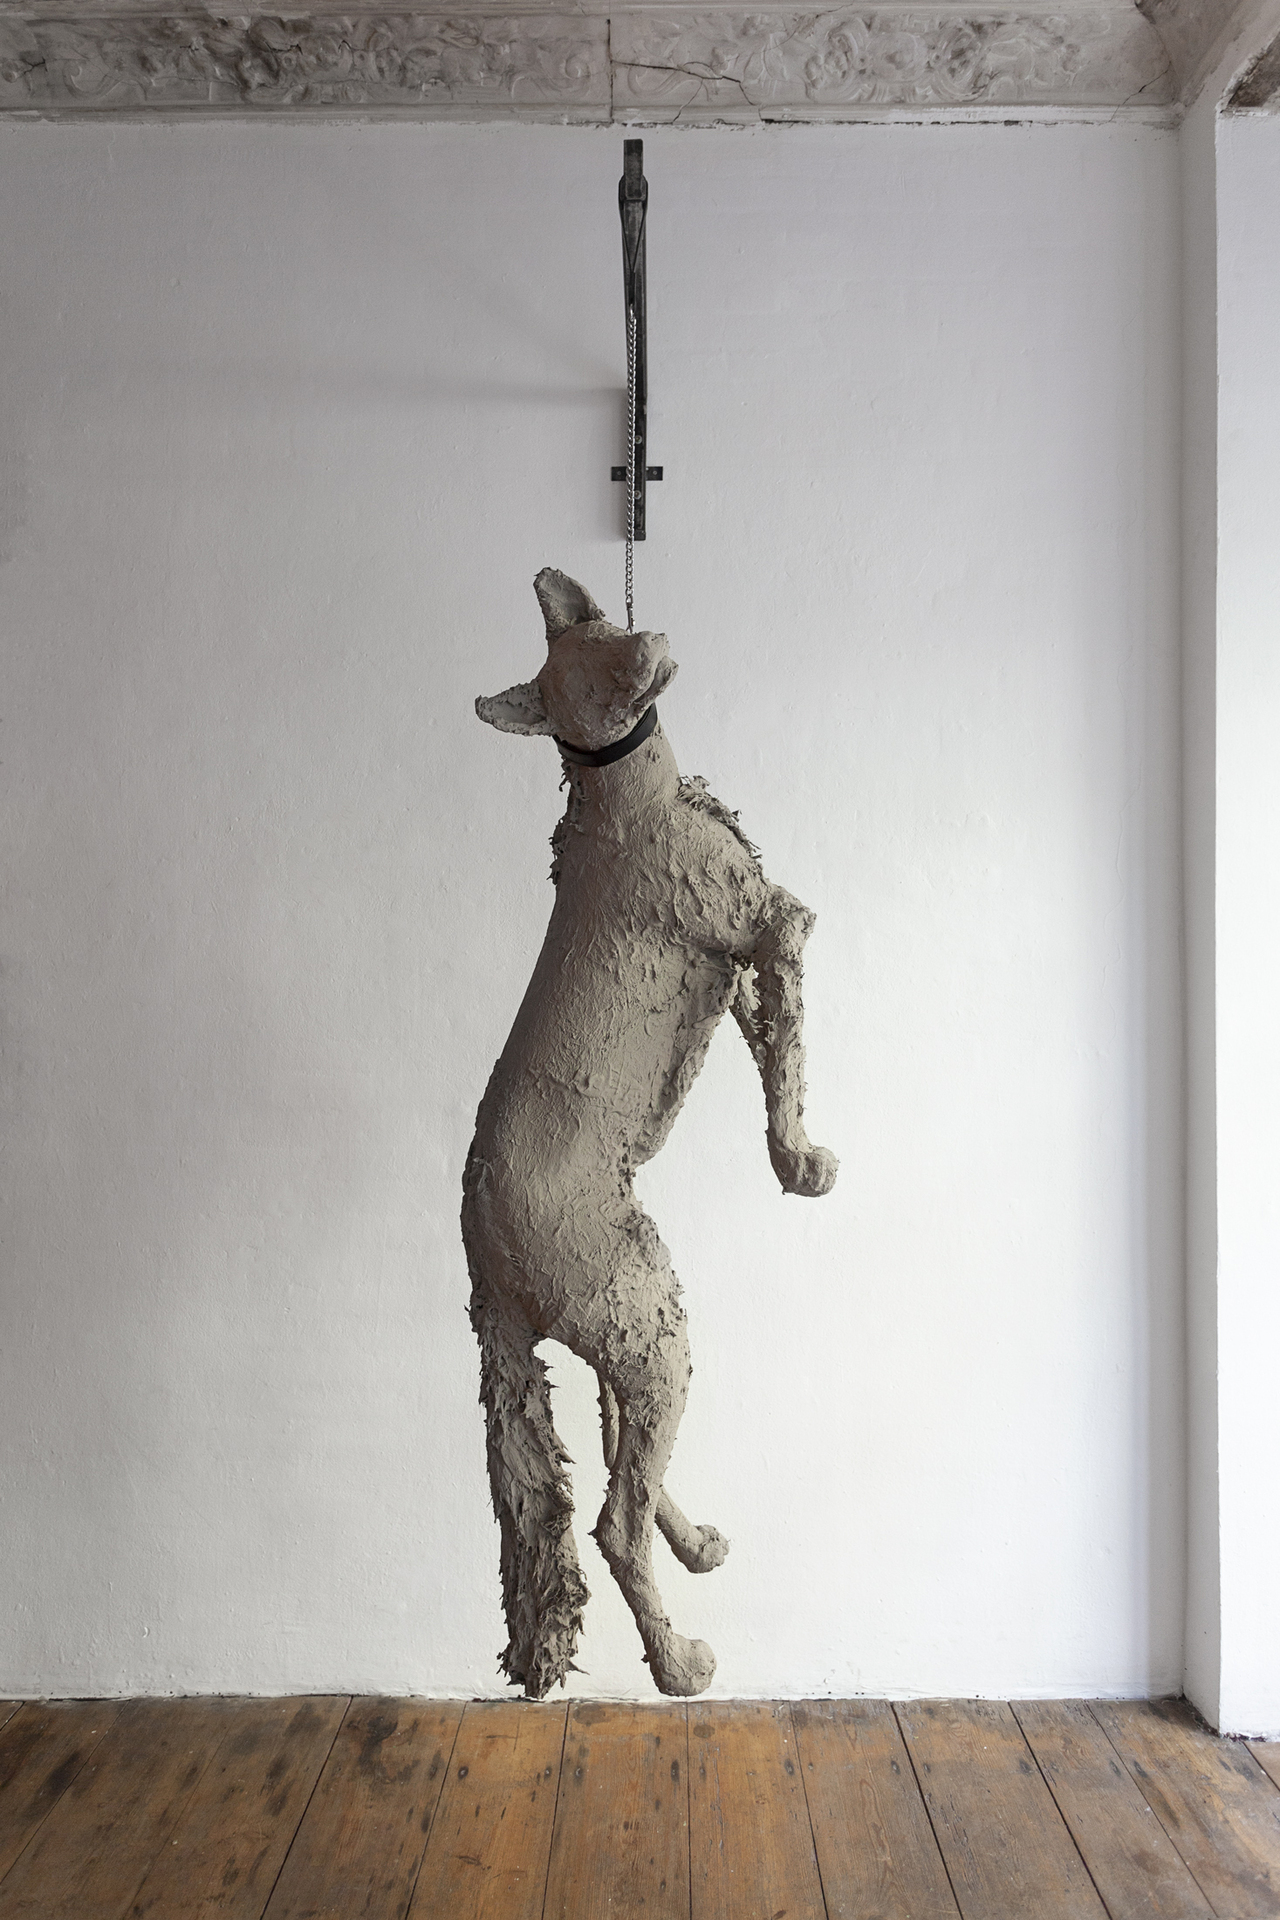 Nicolás Astorga, Hijo de perra (You'll never be good enough), 2022, Upcycled taxidermy, concrete glaze, leather, steel, 234 x 70 x 101 cm